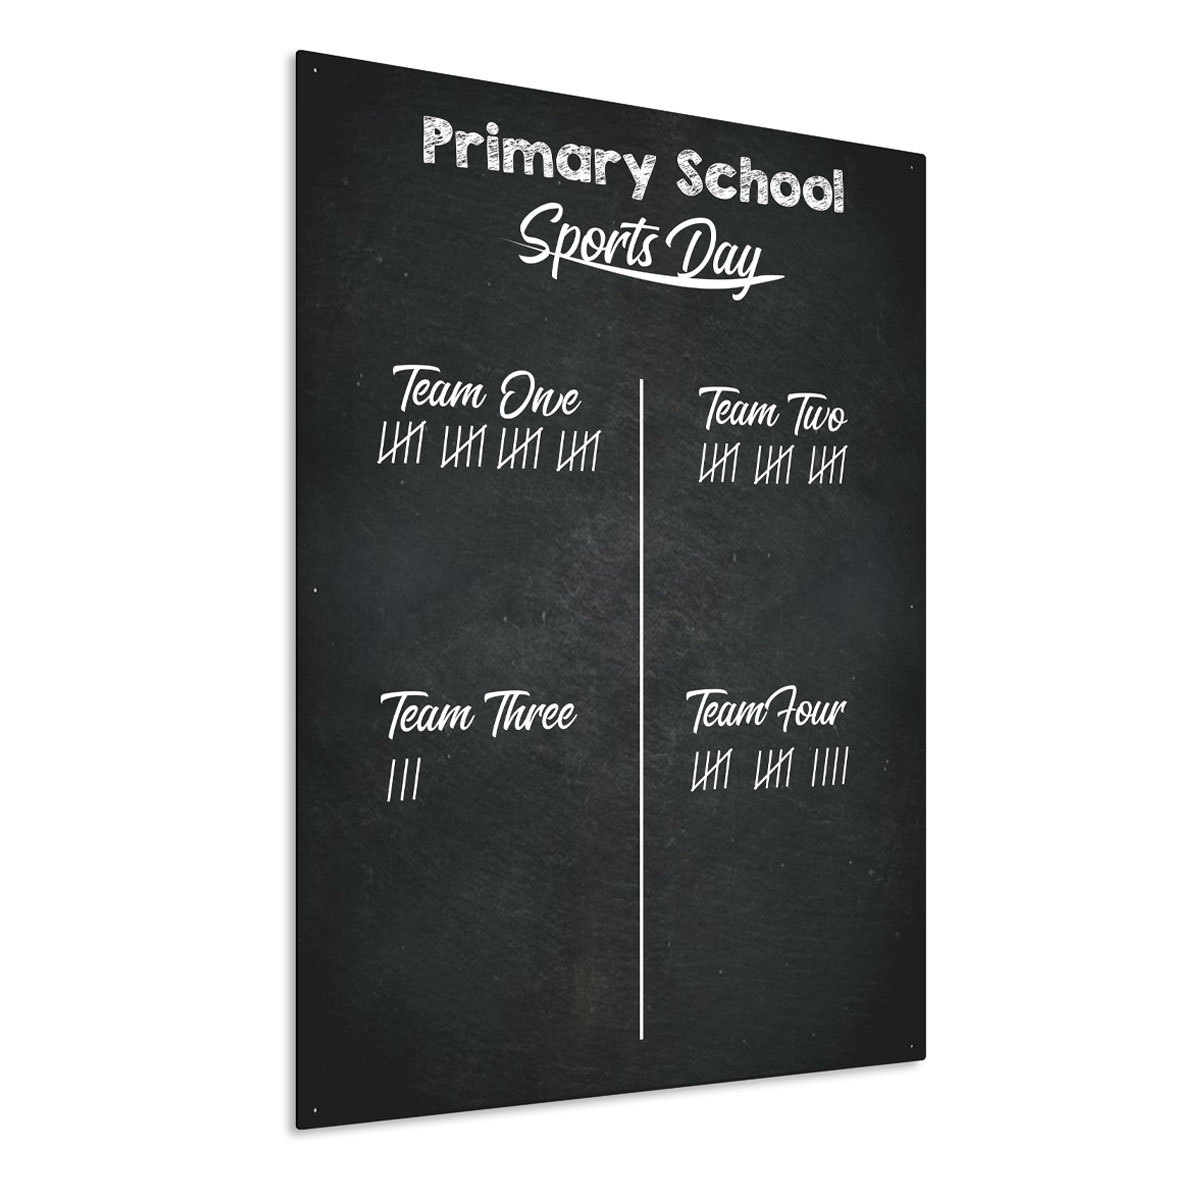 Outdoor Chalkboards Can be Used in School Playgrounds And Sports Facilities - Easy Clean Surface Can be Quickly And Easily Updated